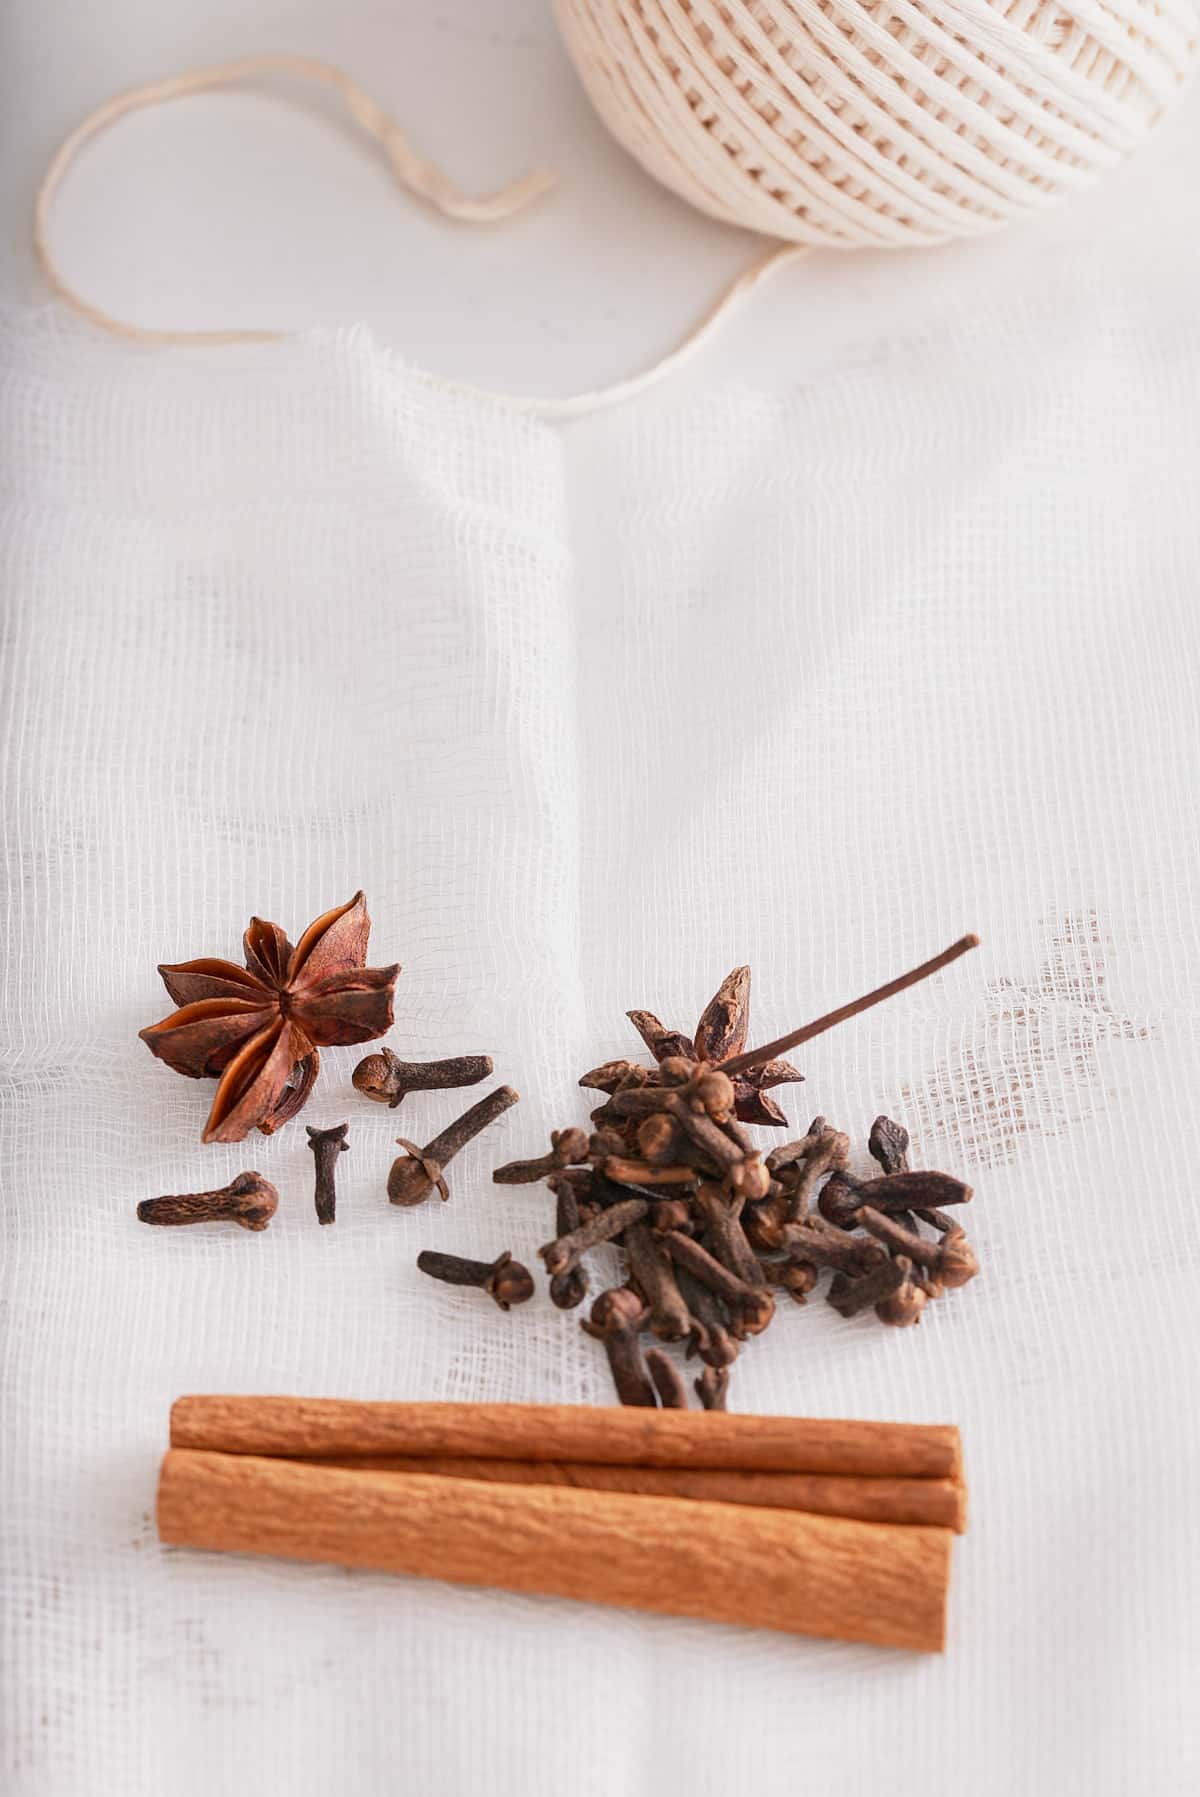 A cinnamon stick, whole cloves and whole star anise set of a piece of white cheesecloth.